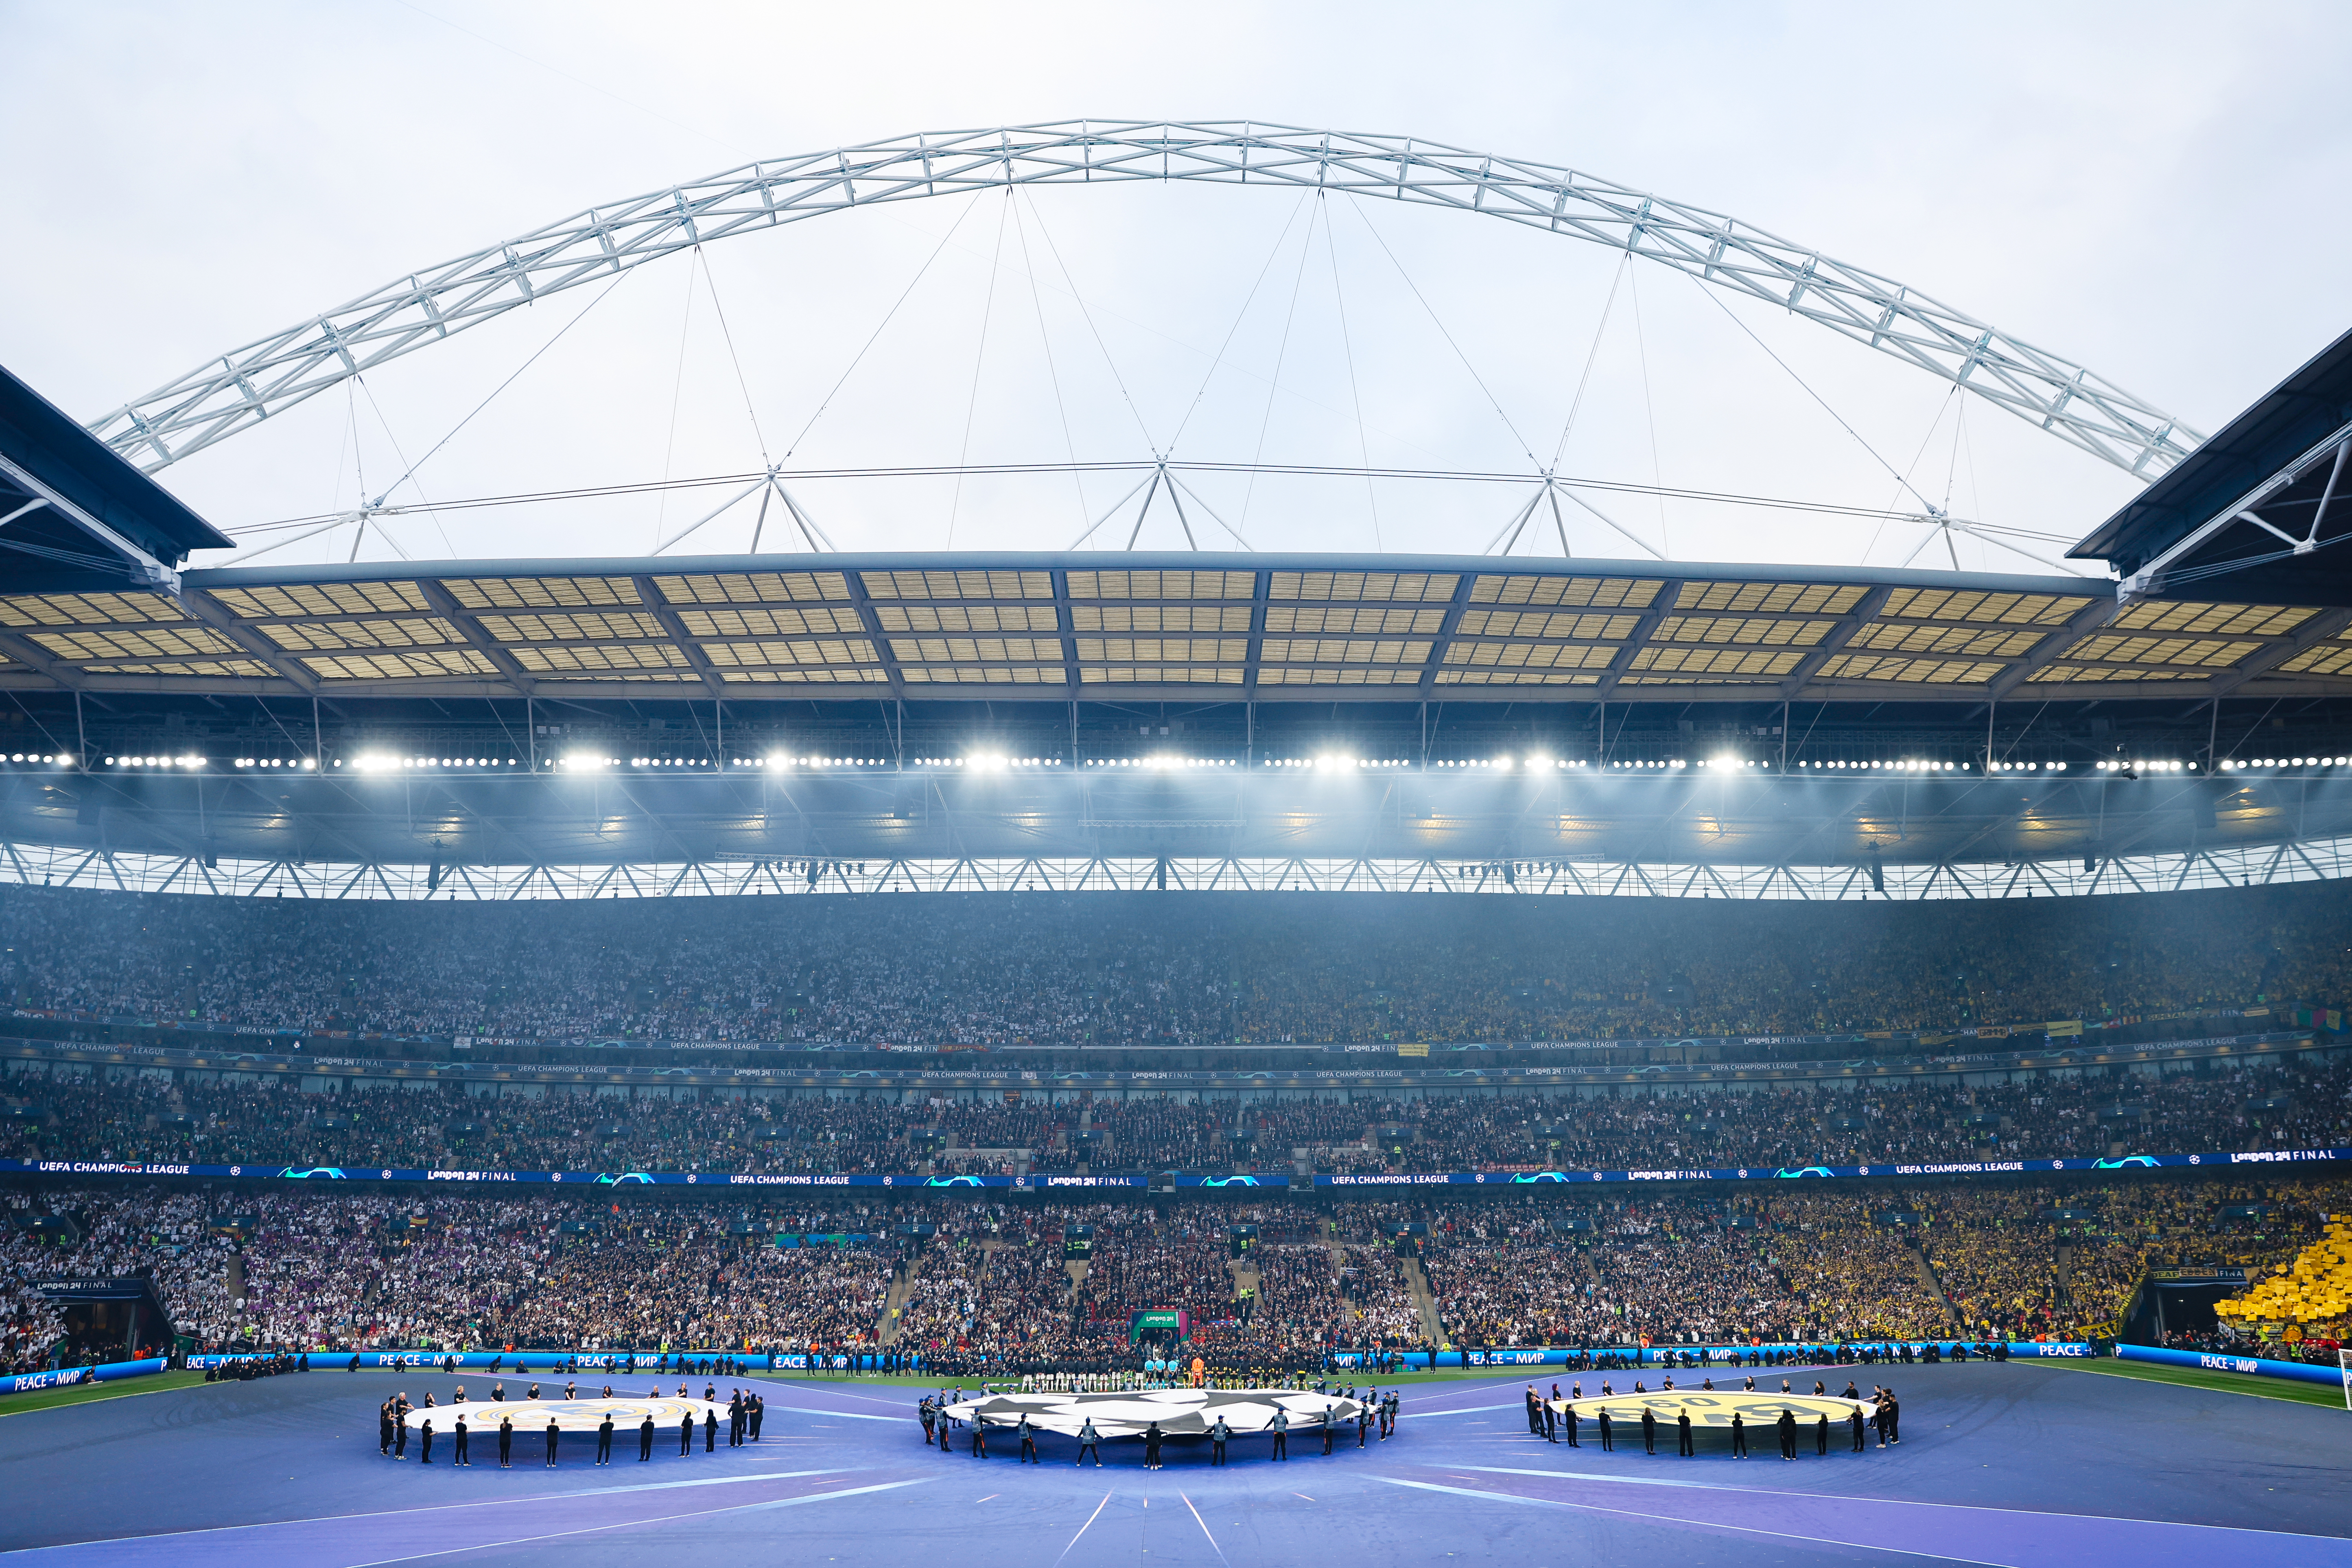 The Champions League Final at Wembley on June 1